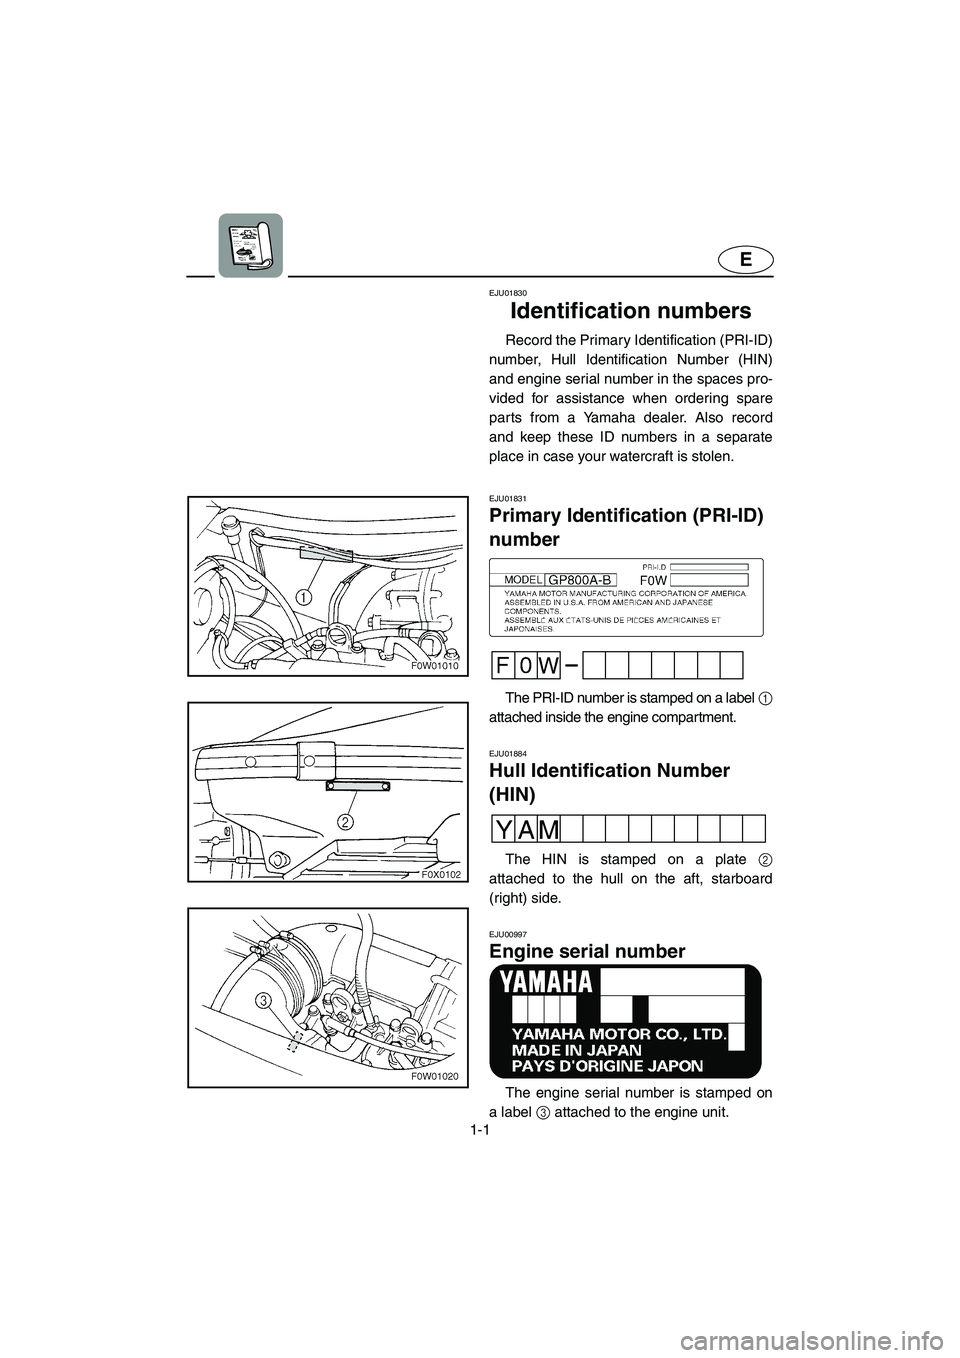 YAMAHA GP800R 2003  Owners Manual 1-1
E
EJU01830
Identification numbers 
Record the Primary Identification (PRI-ID)
number, Hull Identification Number (HIN)
and engine serial number in the spaces pro-
vided for assistance when orderin